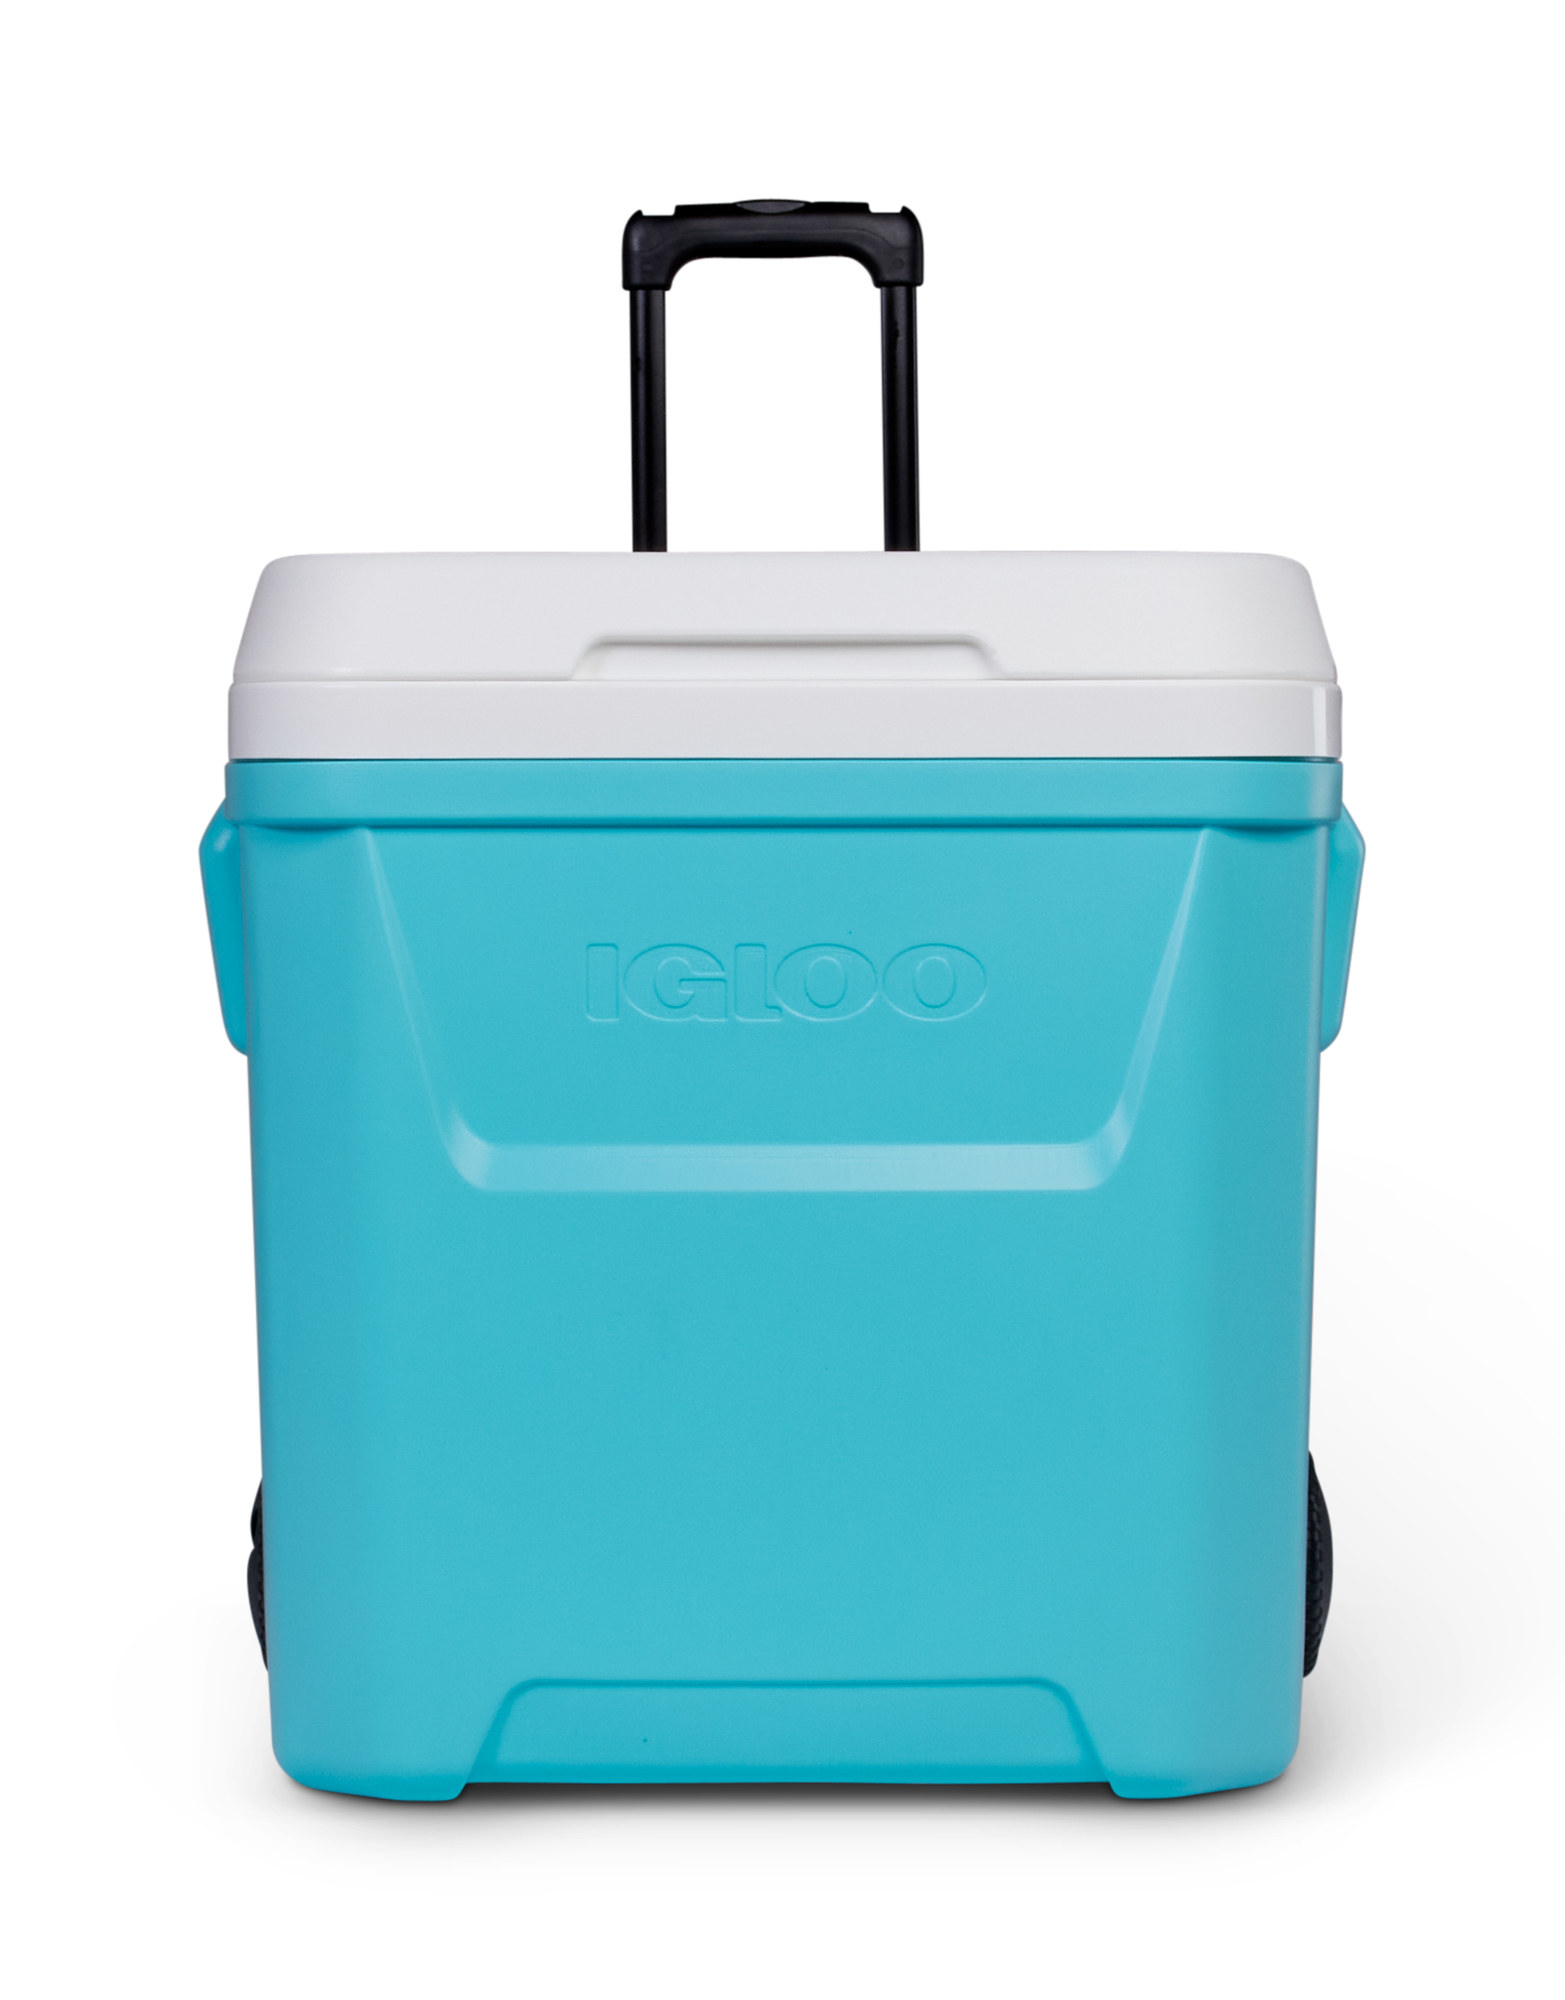 An image of a 60-quart rolling ice chest cooler